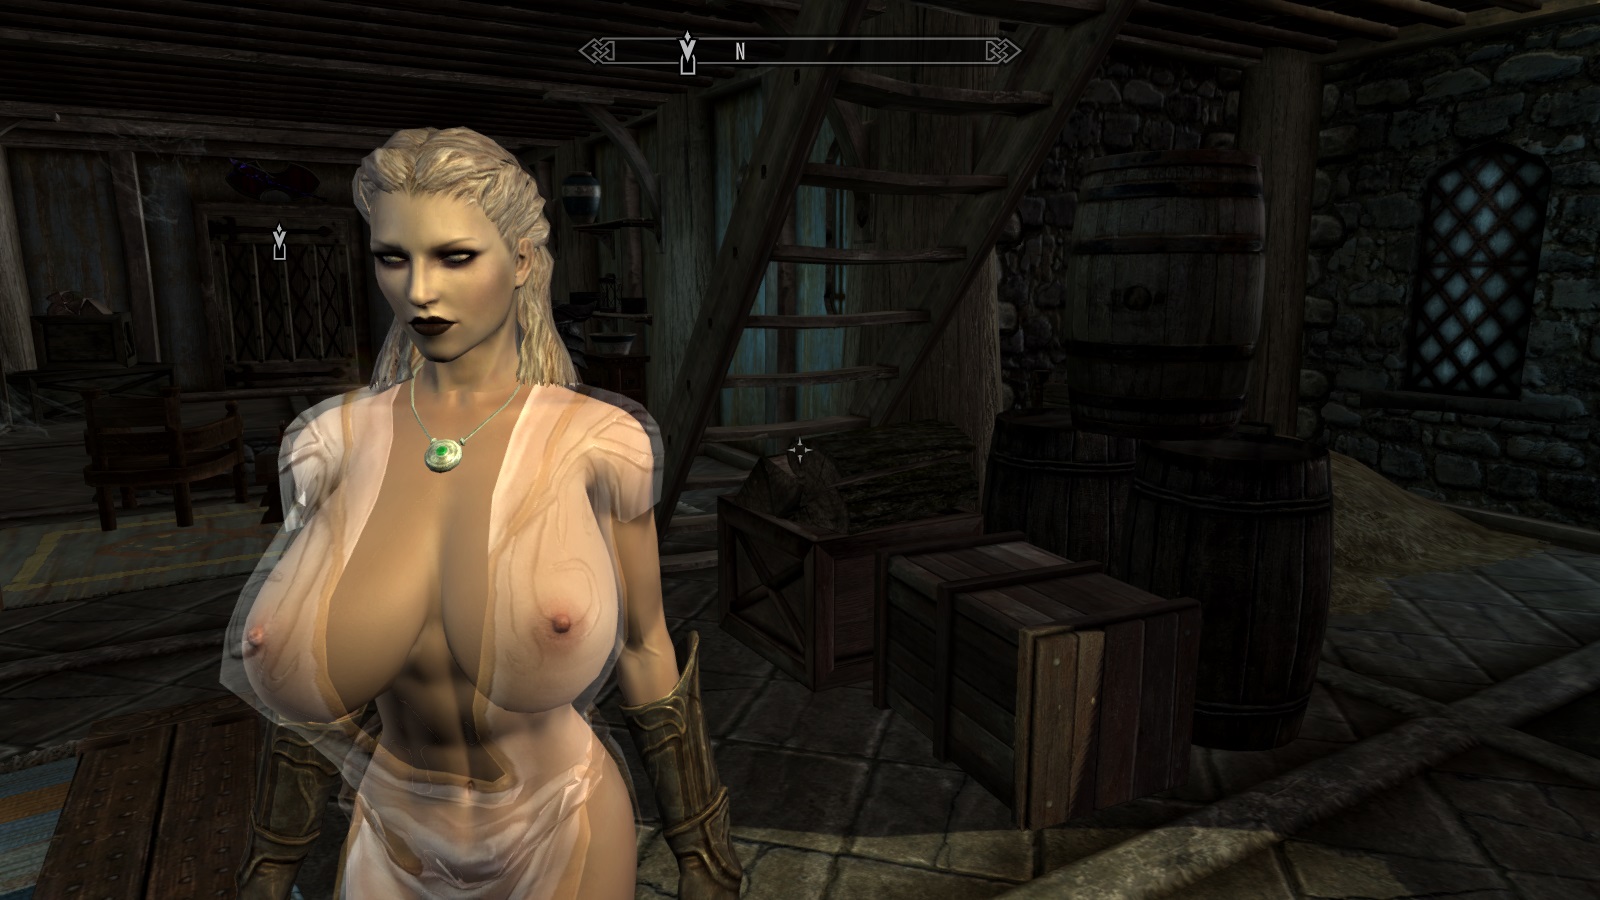 Sex Help Breasts X Bigger In Clothing Skyrim Technical porn images help bre...